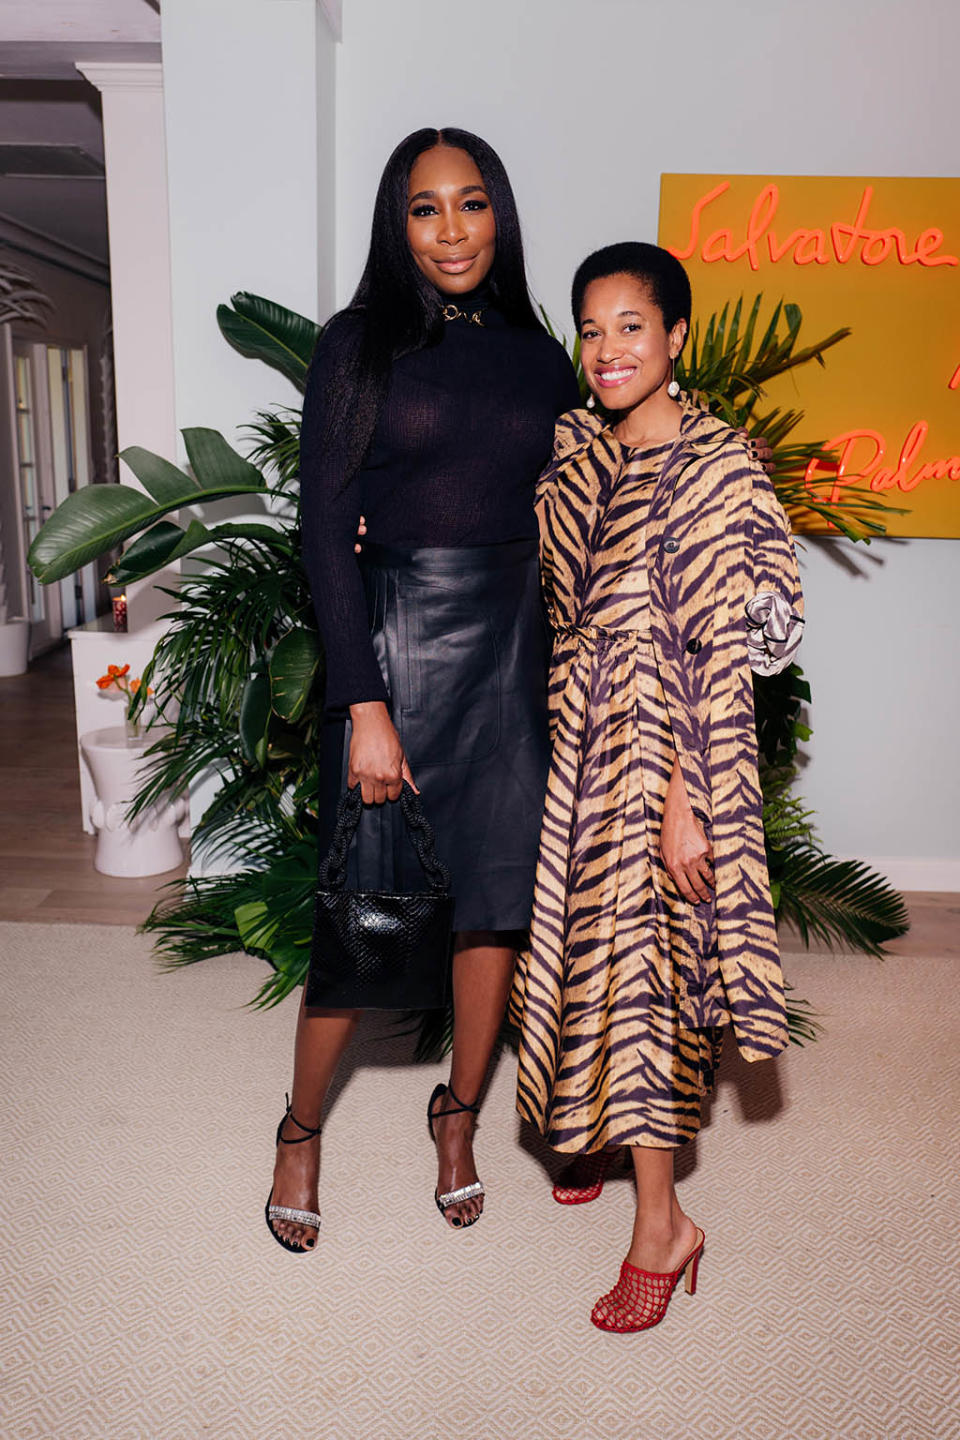 (L-R) Venus Williams and Tamu McPherson at the reopening of Salvatore Ferragamo in Palm Beach, Florida on May 11, 2022.